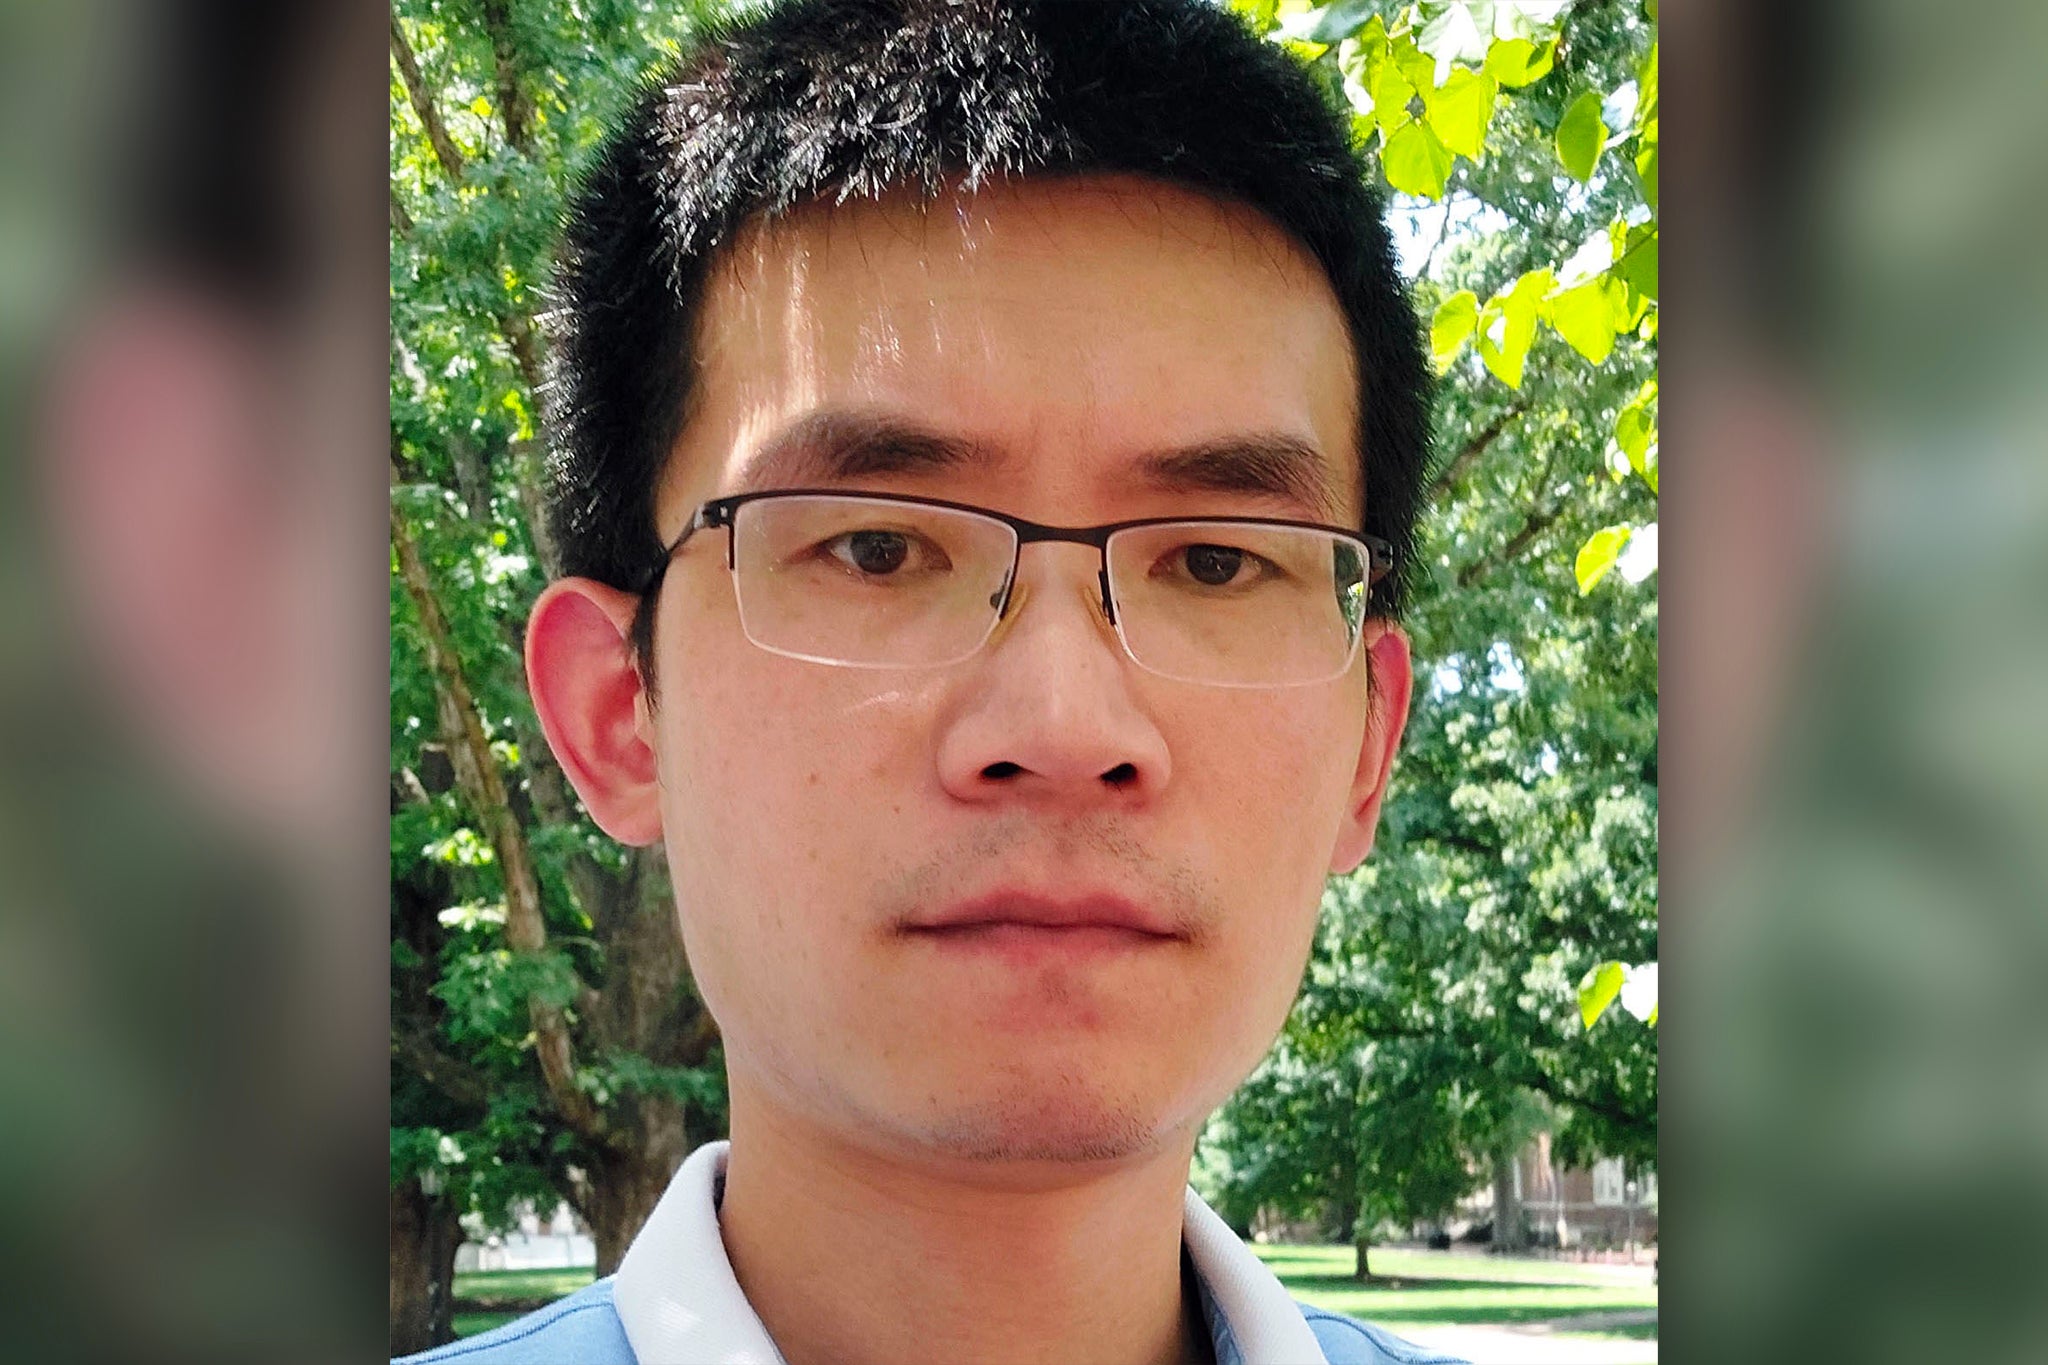 Dr Zijie Yan was identified as the victim of the shooting